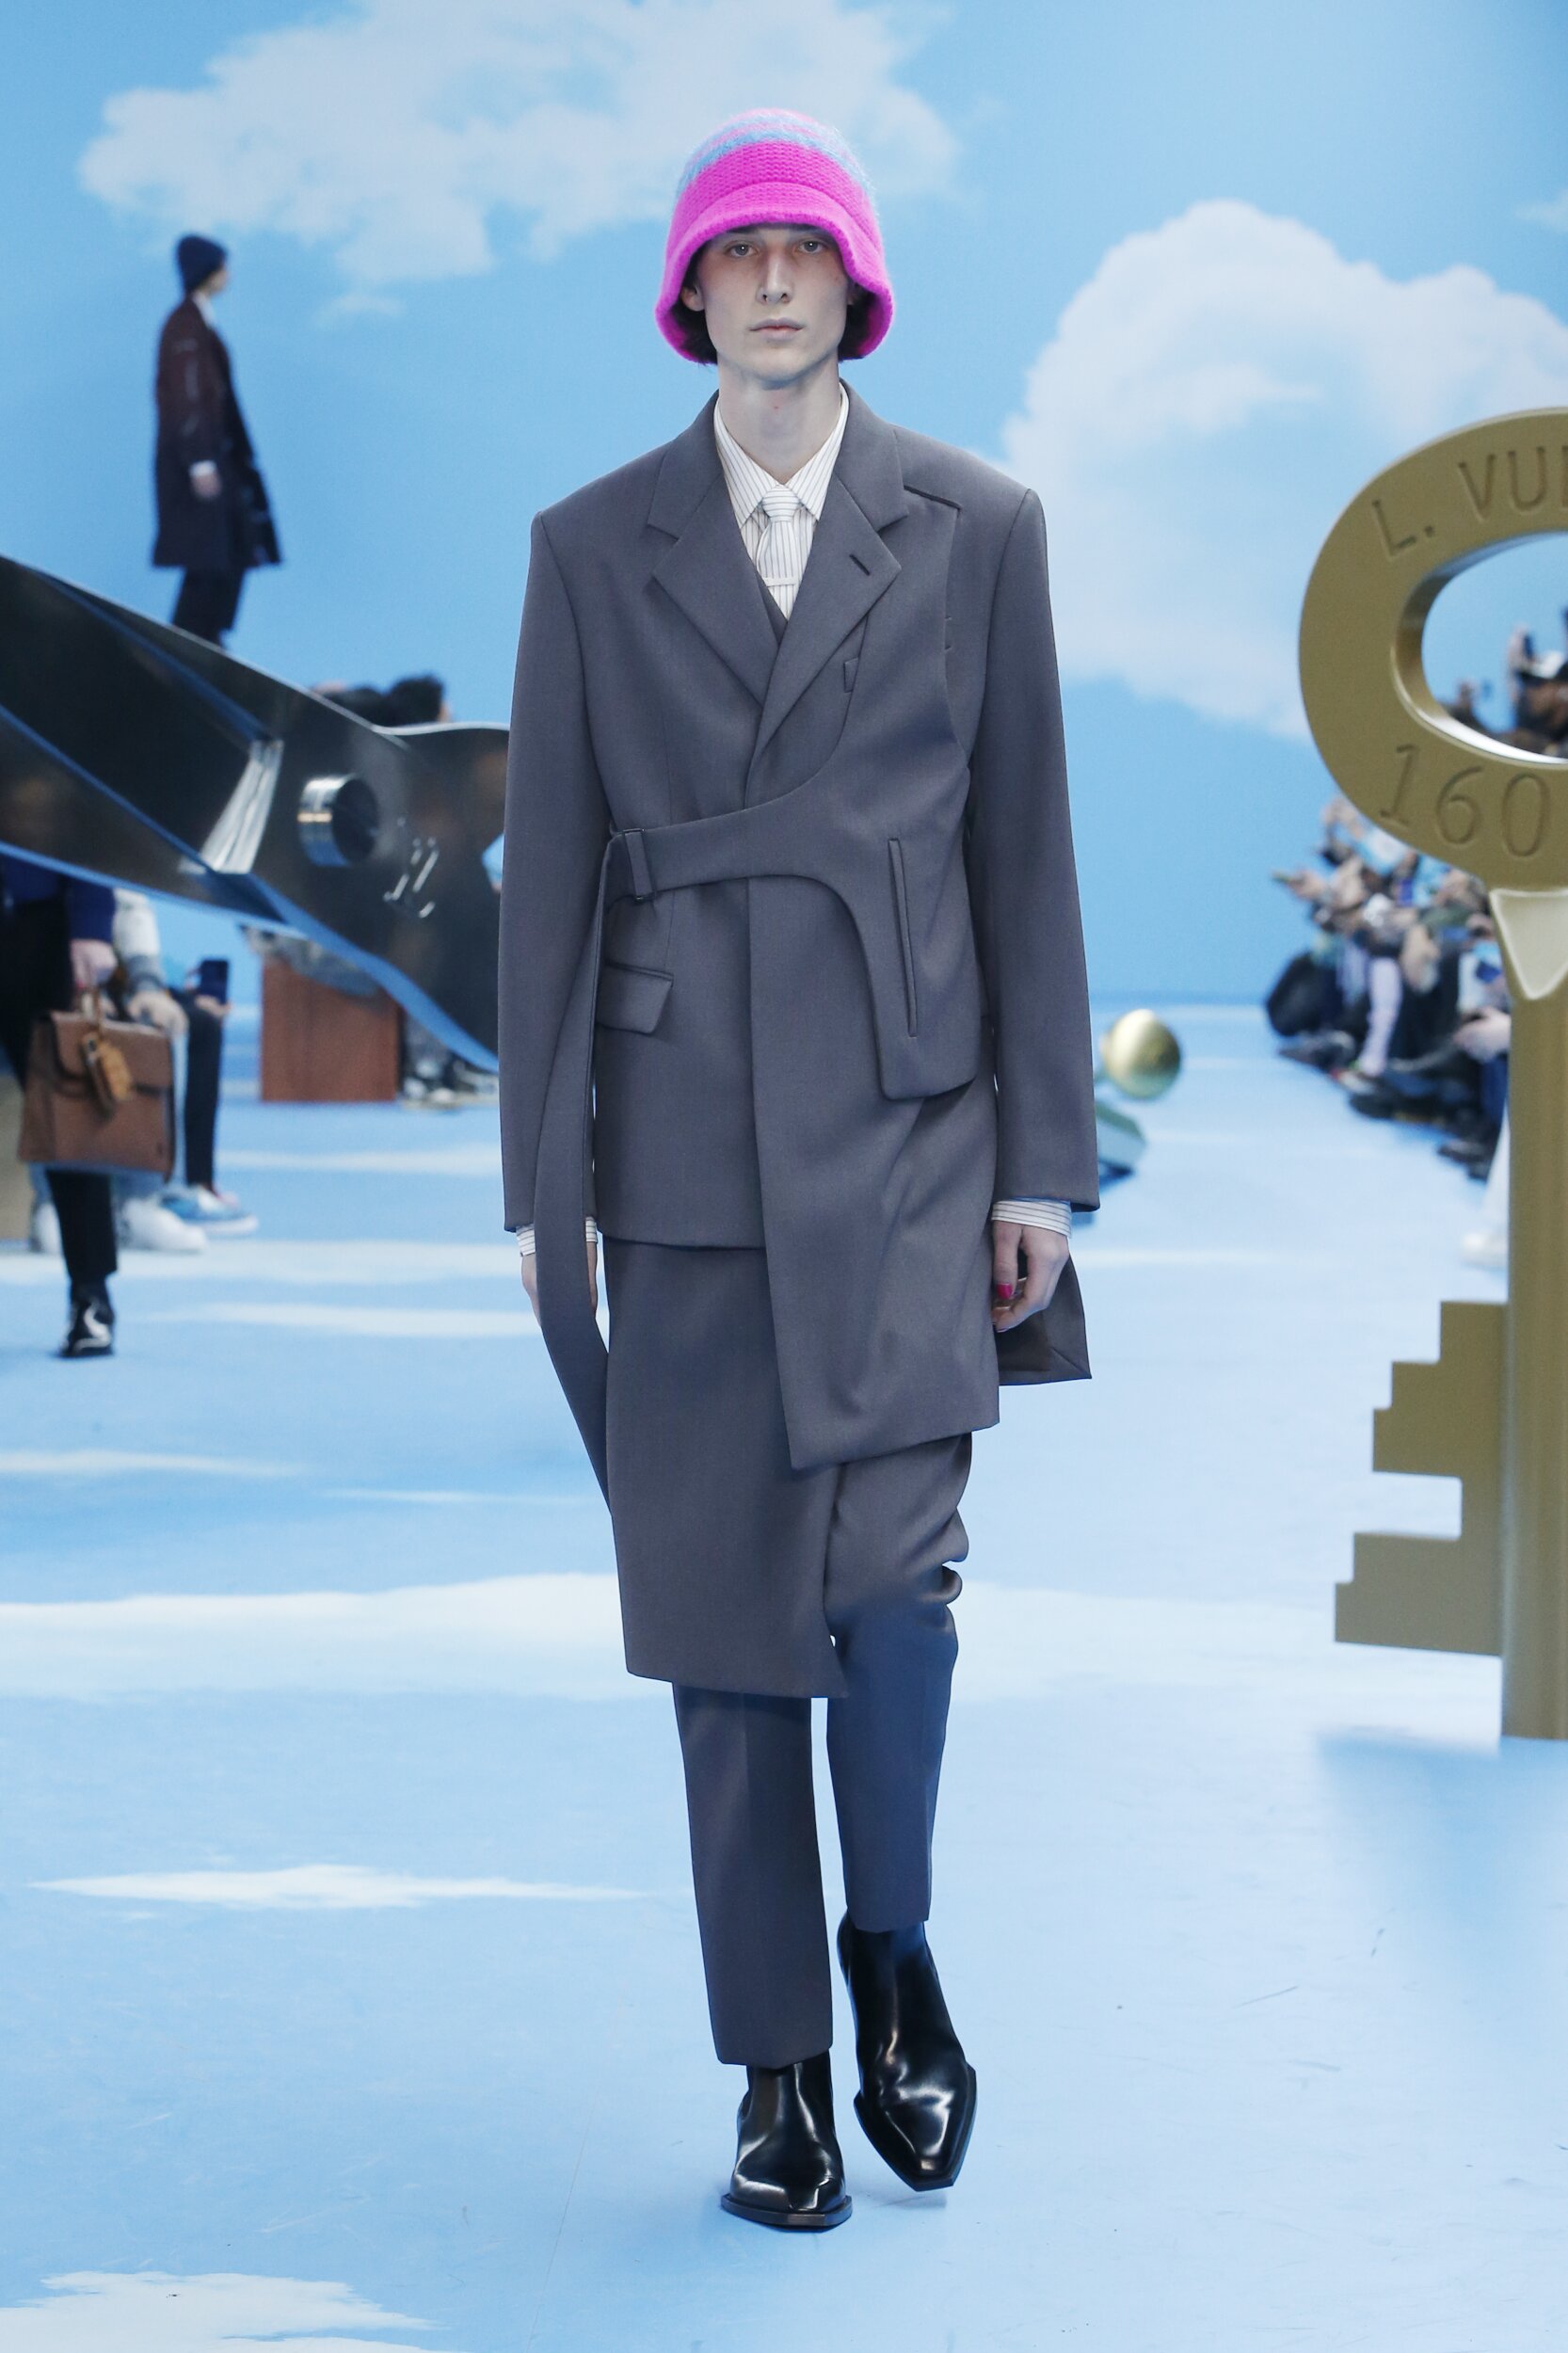 LOUIS VUITTON FALL WINTER 2020 MEN’S COLLECTION | The Skinny Beep